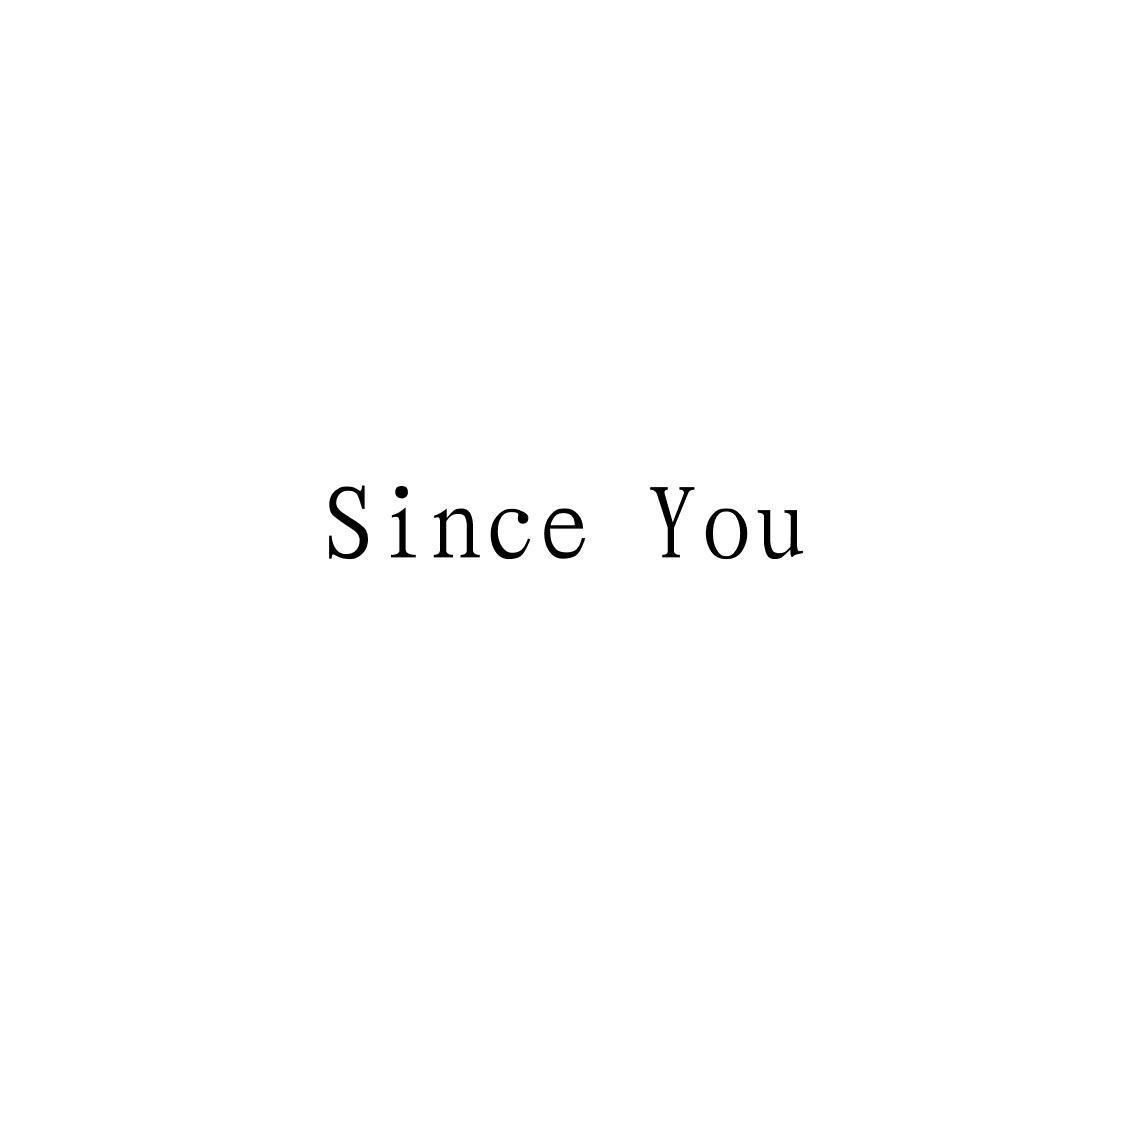 SINCE YOU